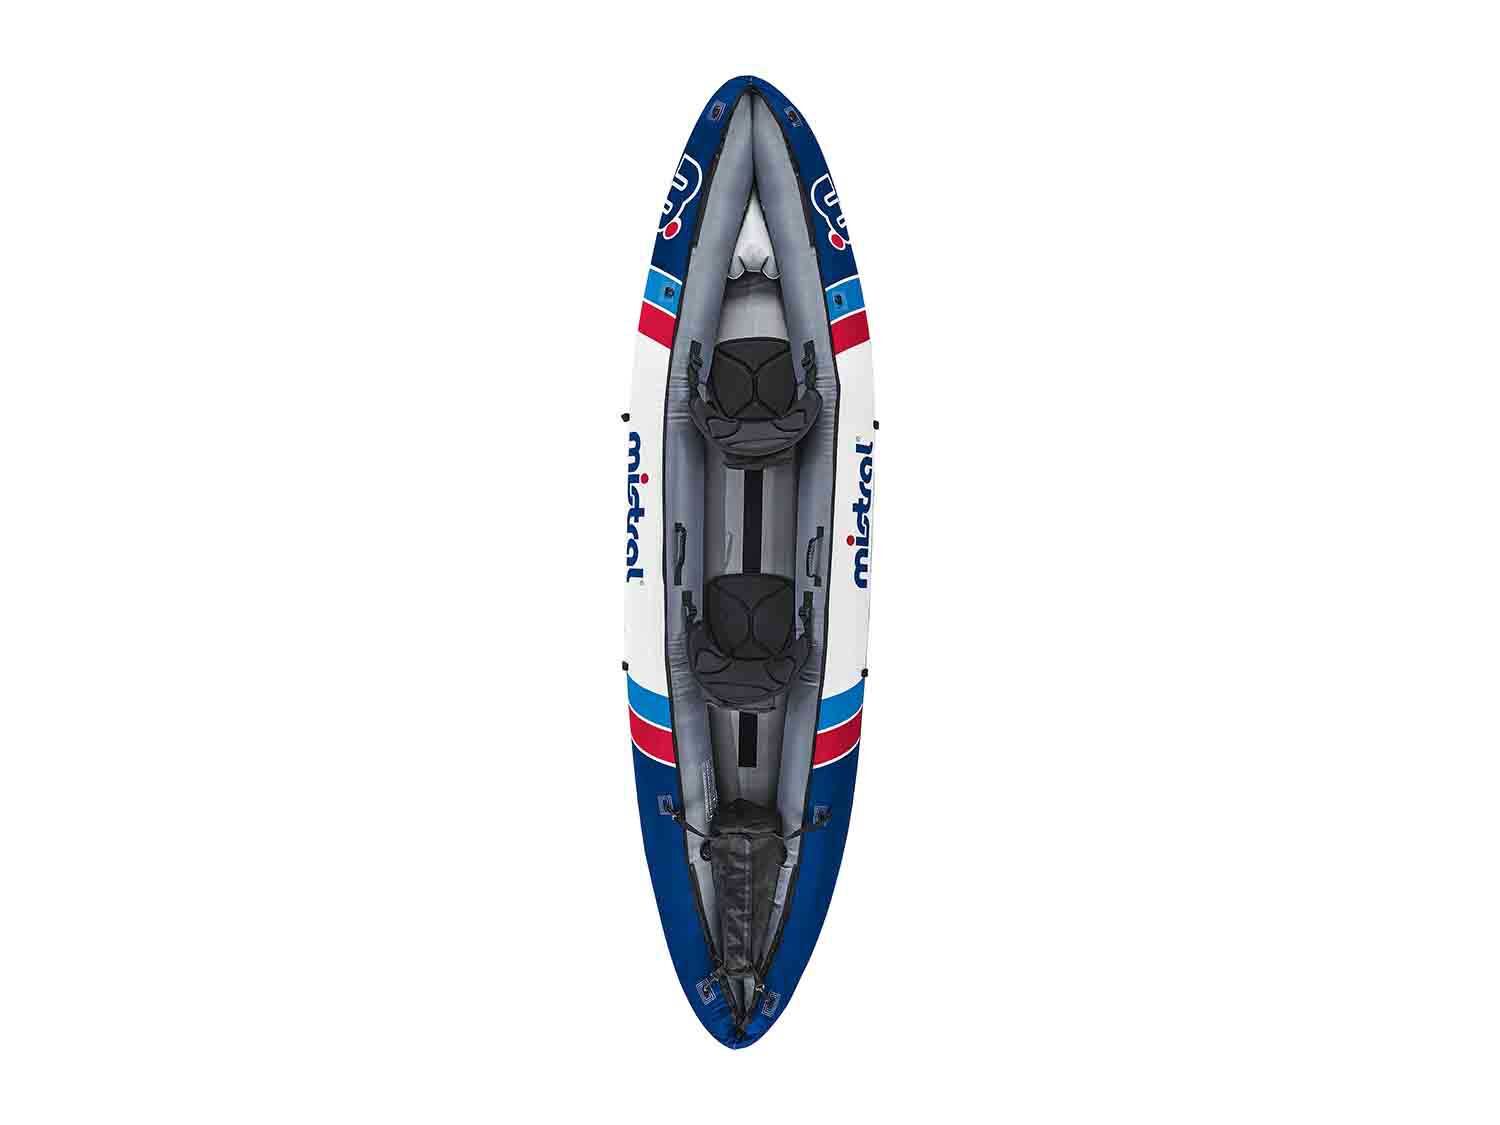 Mistral Kayak inflable con asientos desmontables